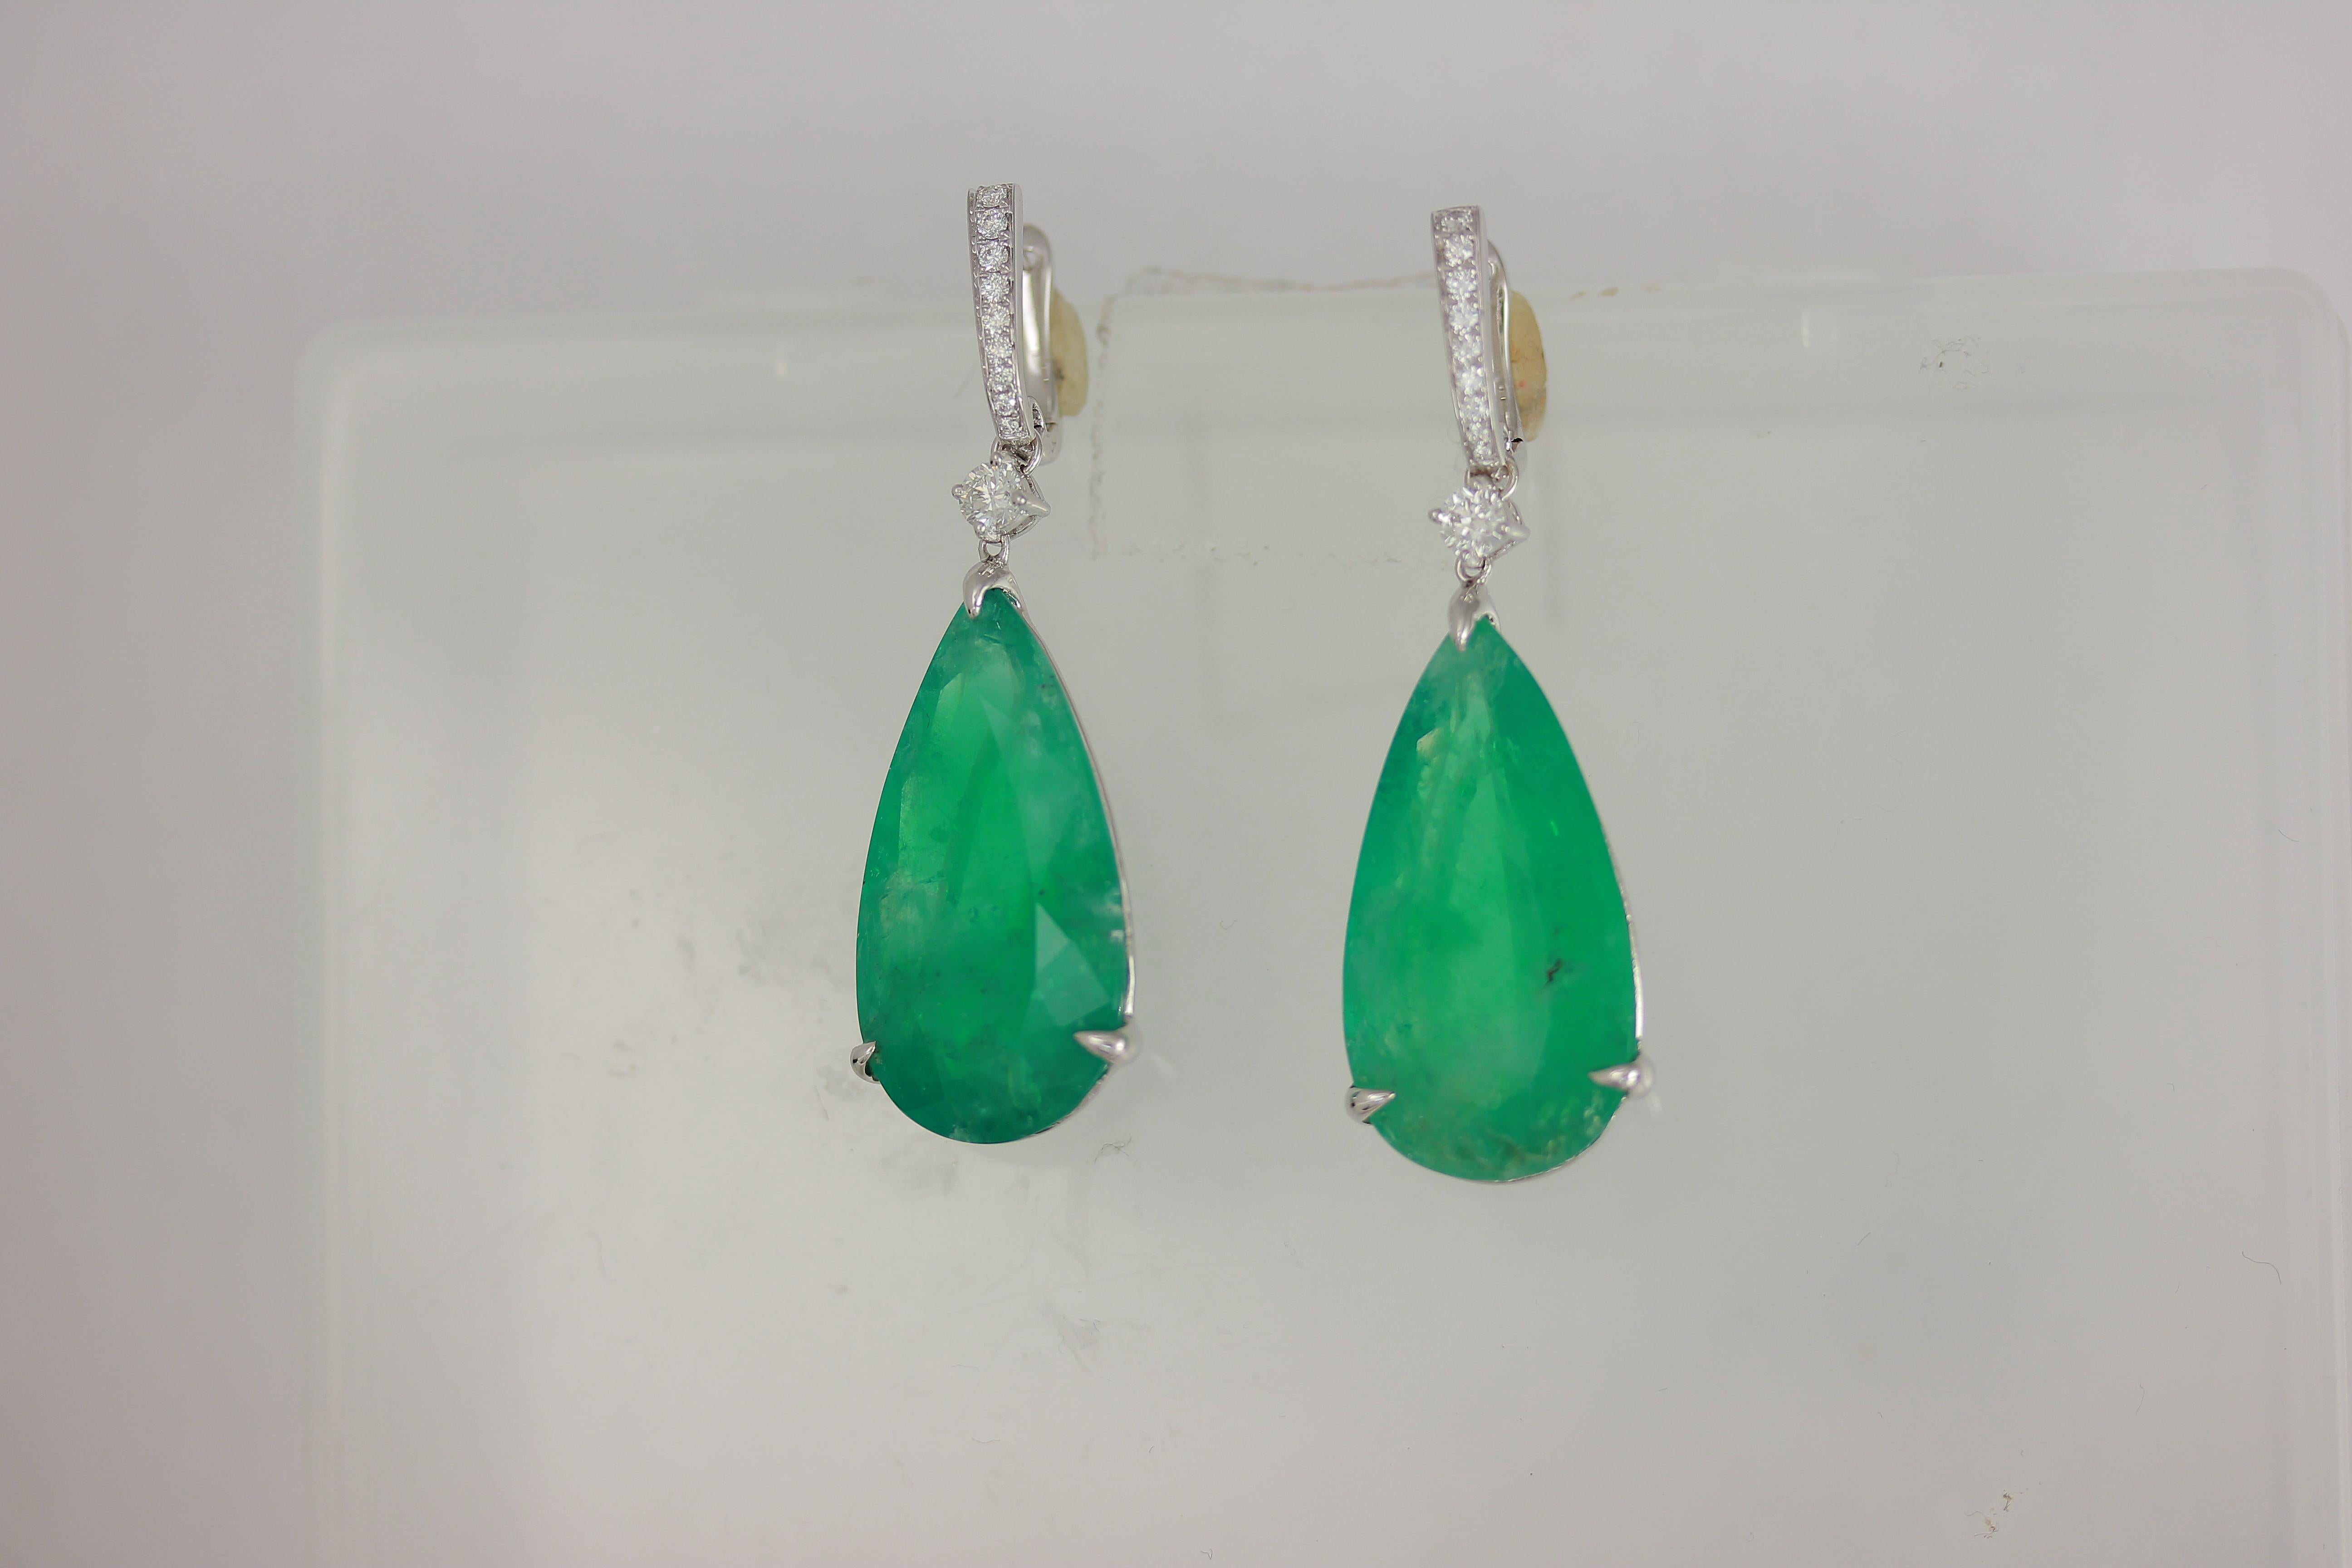 Contemporary Frederic Sage 38.83 Carat Brazilian Emerald One of Kind Cocktail Drop Earrings For Sale